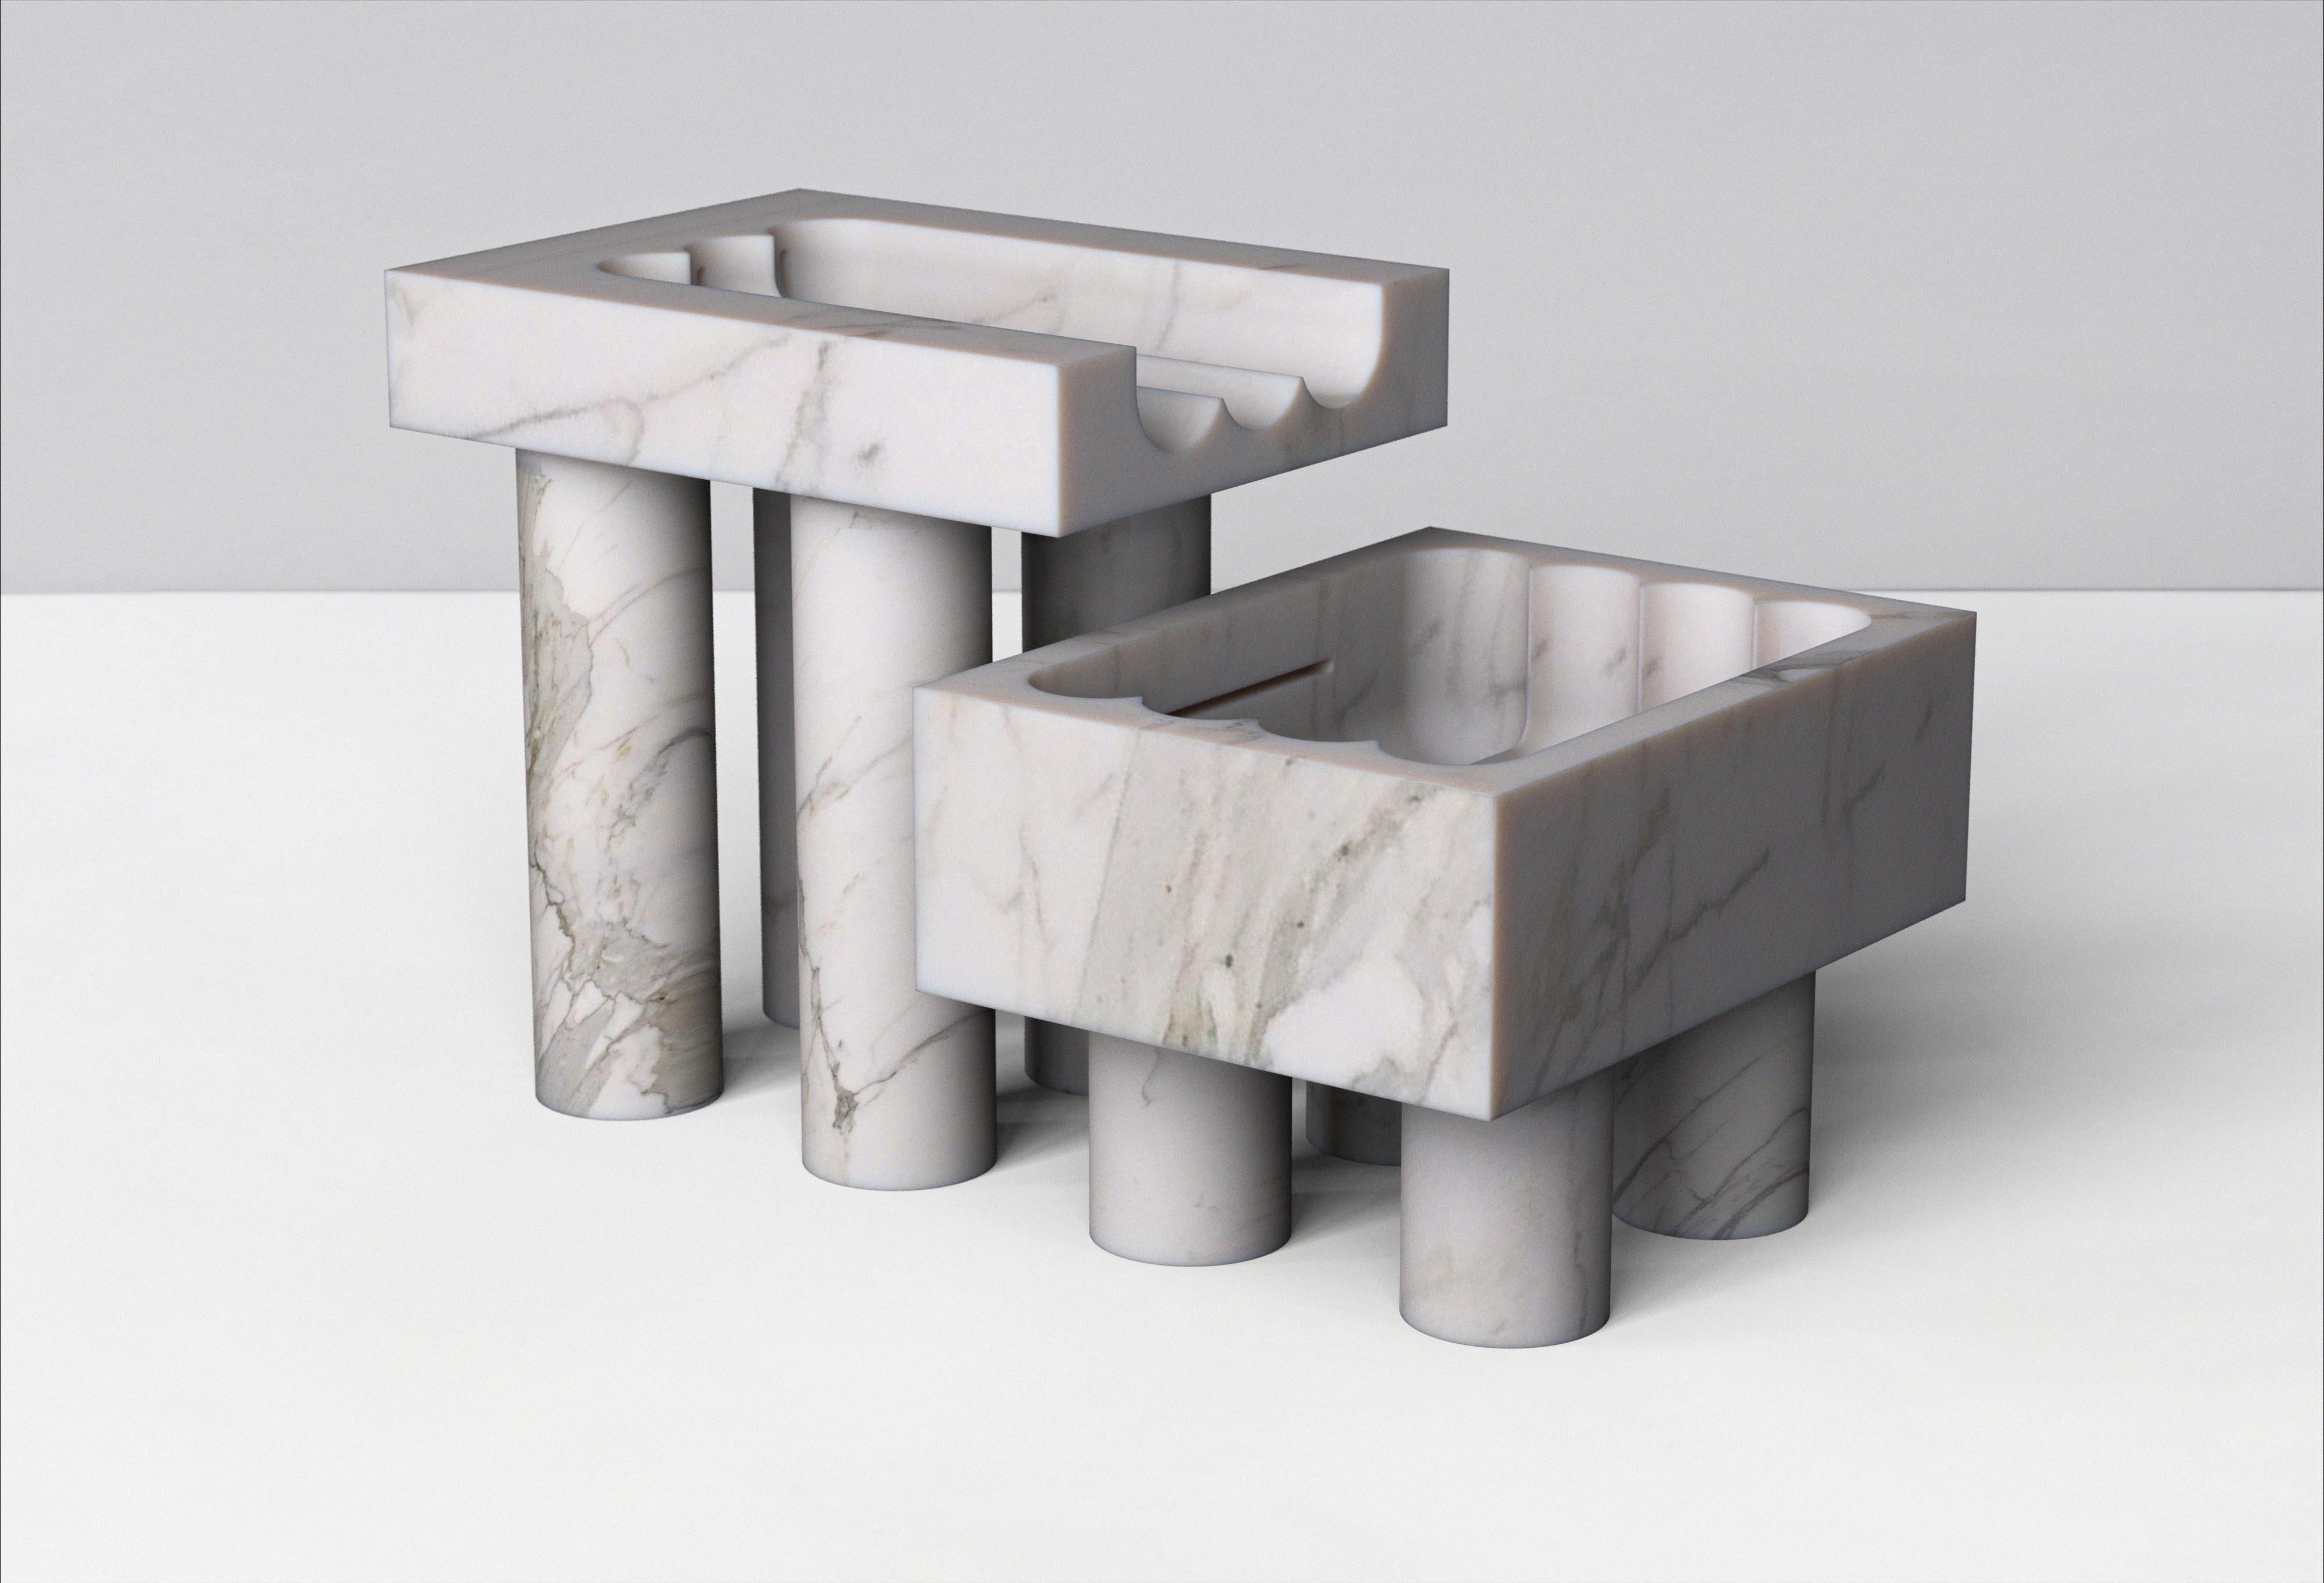 Calacatta marble Monolithic font by Tino Seubert.
Dimensions: D 100.5 x W 61 x H 62.1 cm.
Materials: Calacatta marble.

Tino Seubert
When he first made his now signature wicker and aluminium stools and benches in 2018 for a show at the Hepworth